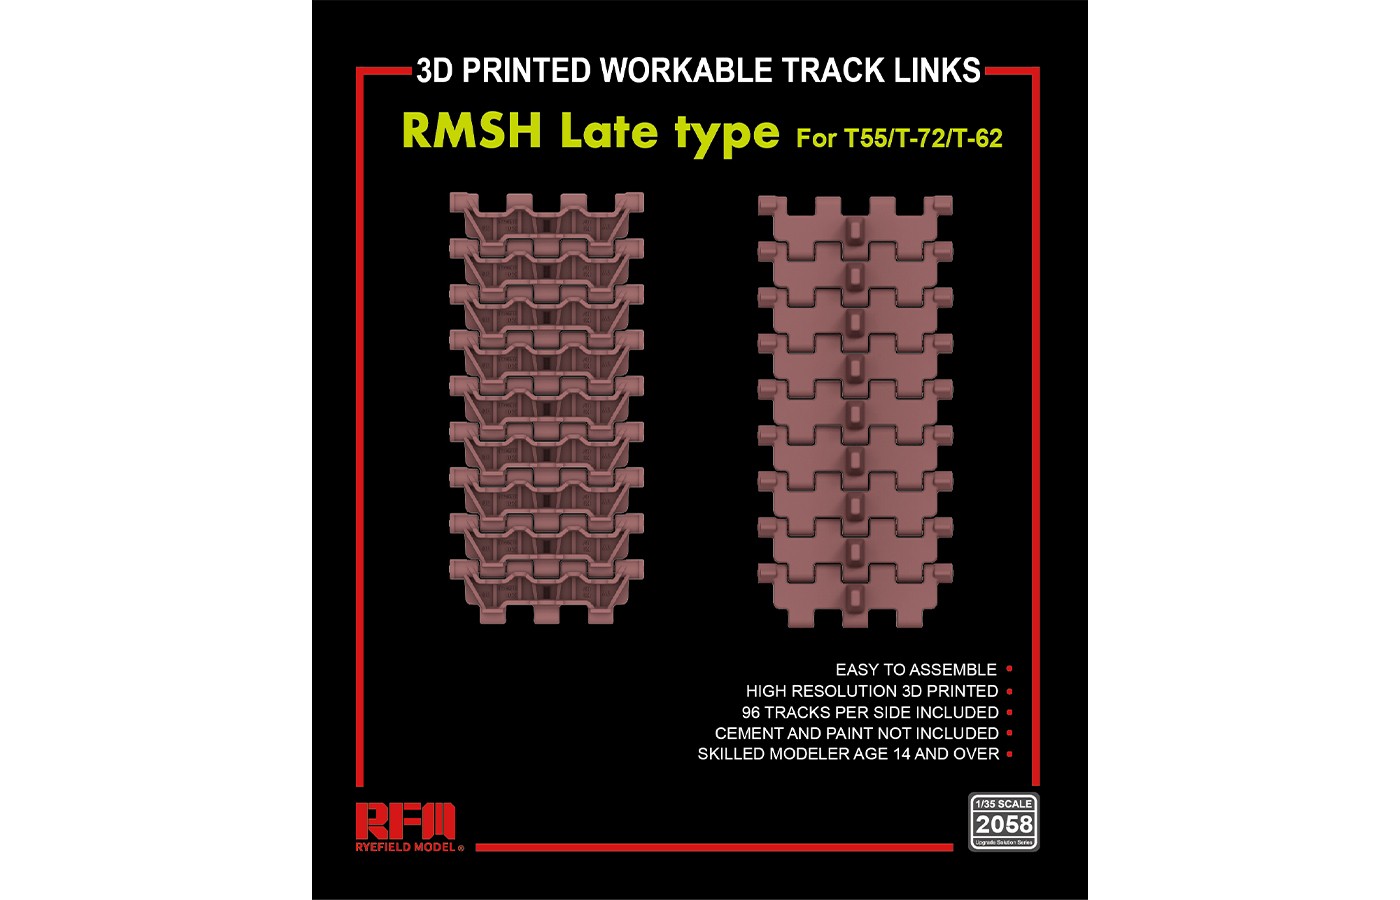 RM-2058  RMSH Late Type For T55/-72/T-62 3D PRINTED WORKABLE TRACK LINKS